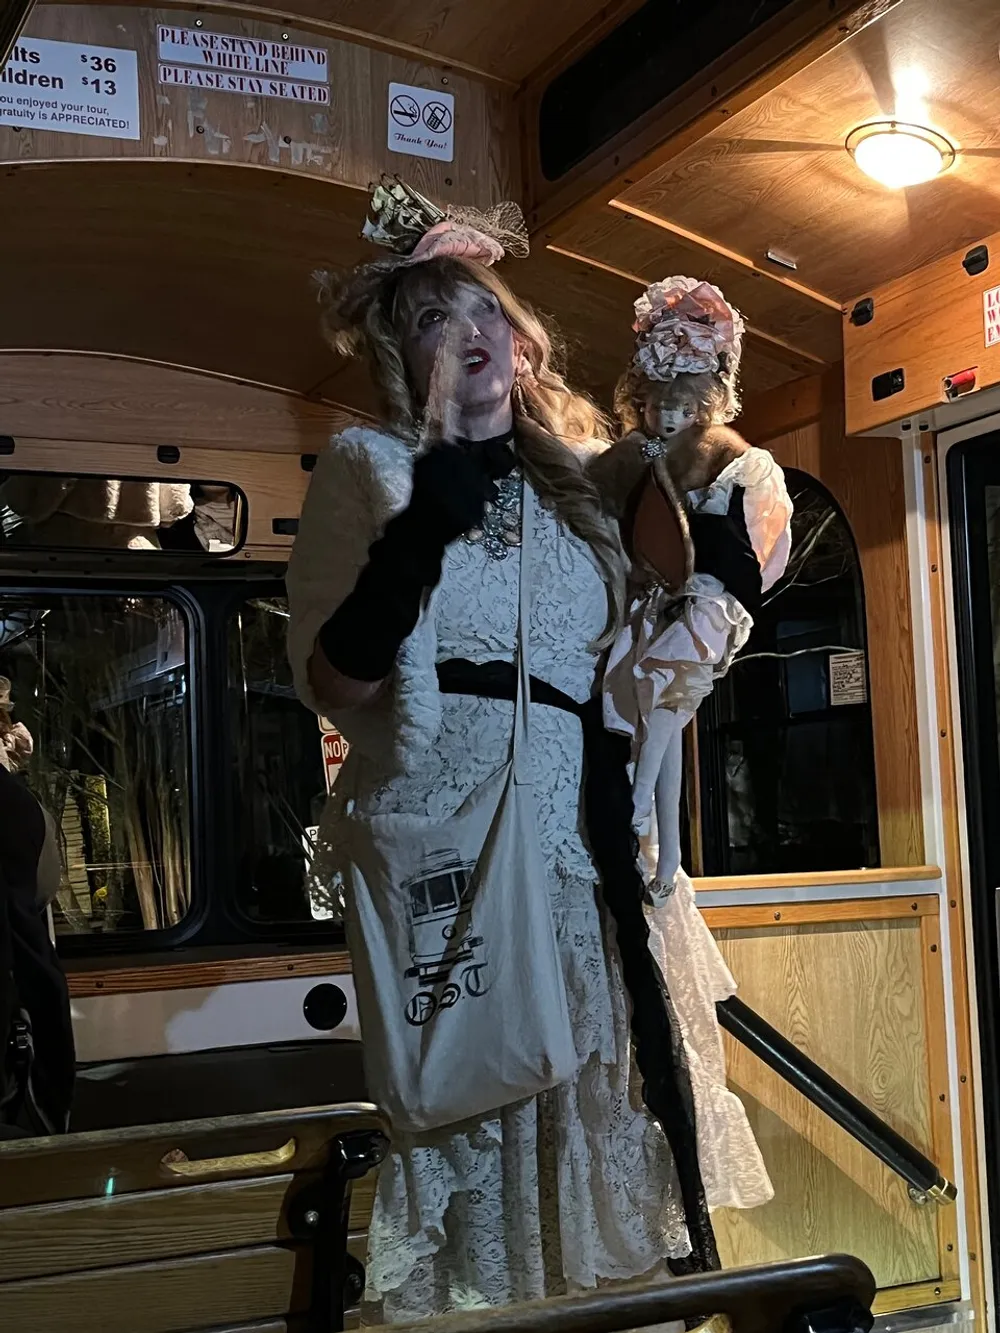 A person dressed in vintage attire complete with a hat and holding a doll is standing on a vehicle resembling a trolley or bus surrounded by warm lighting and wooden paneling